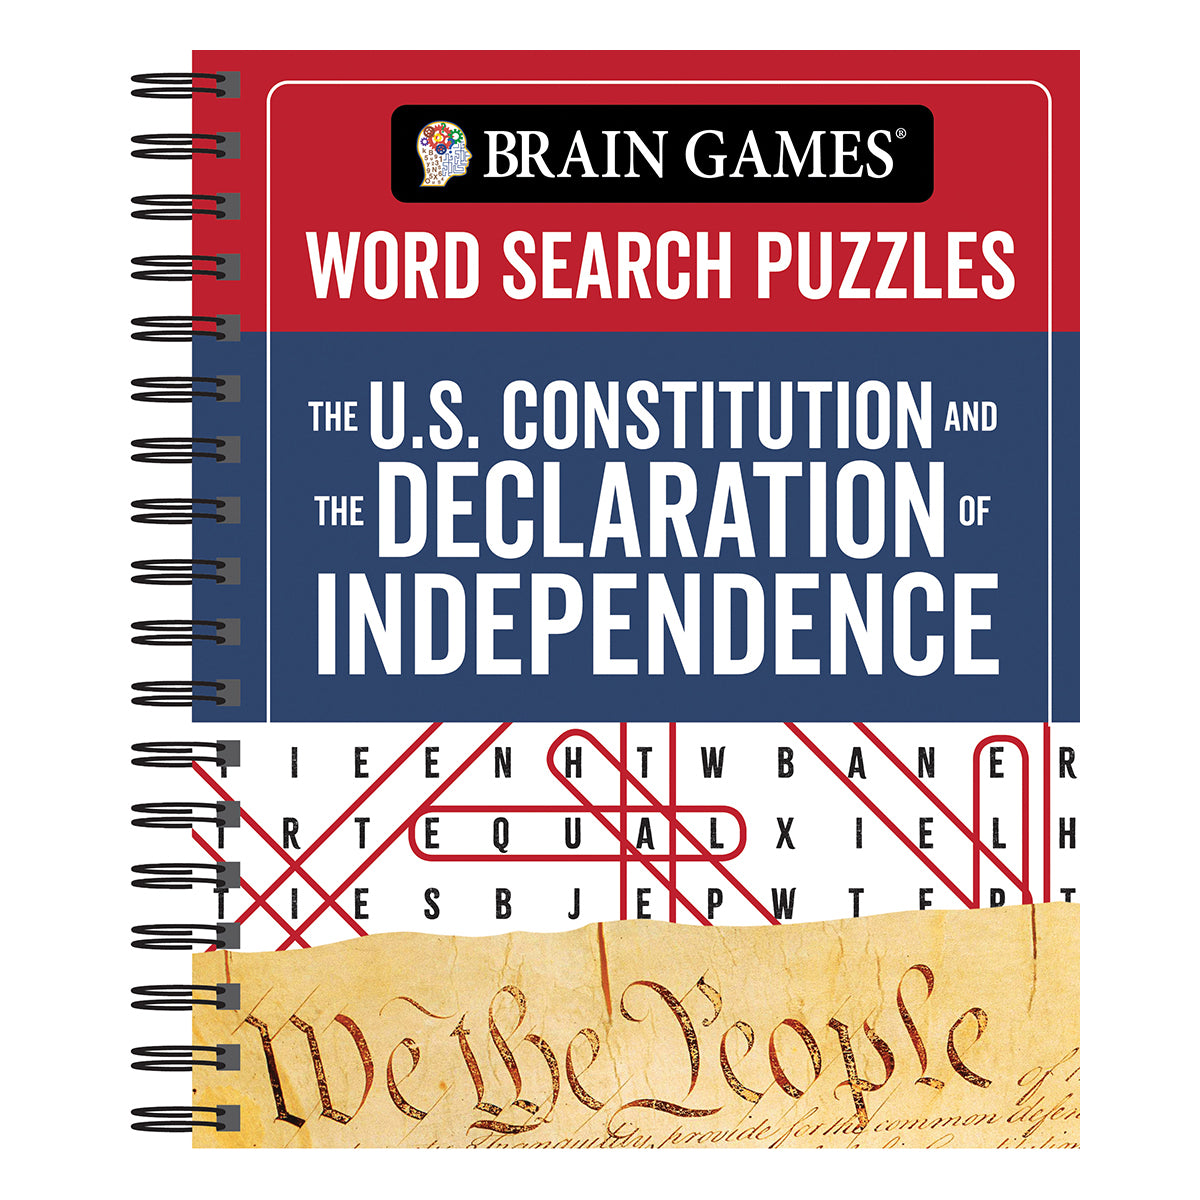 Brain Games  Word Search Puzzles The U.S. Constitution and the Declaration of Independence